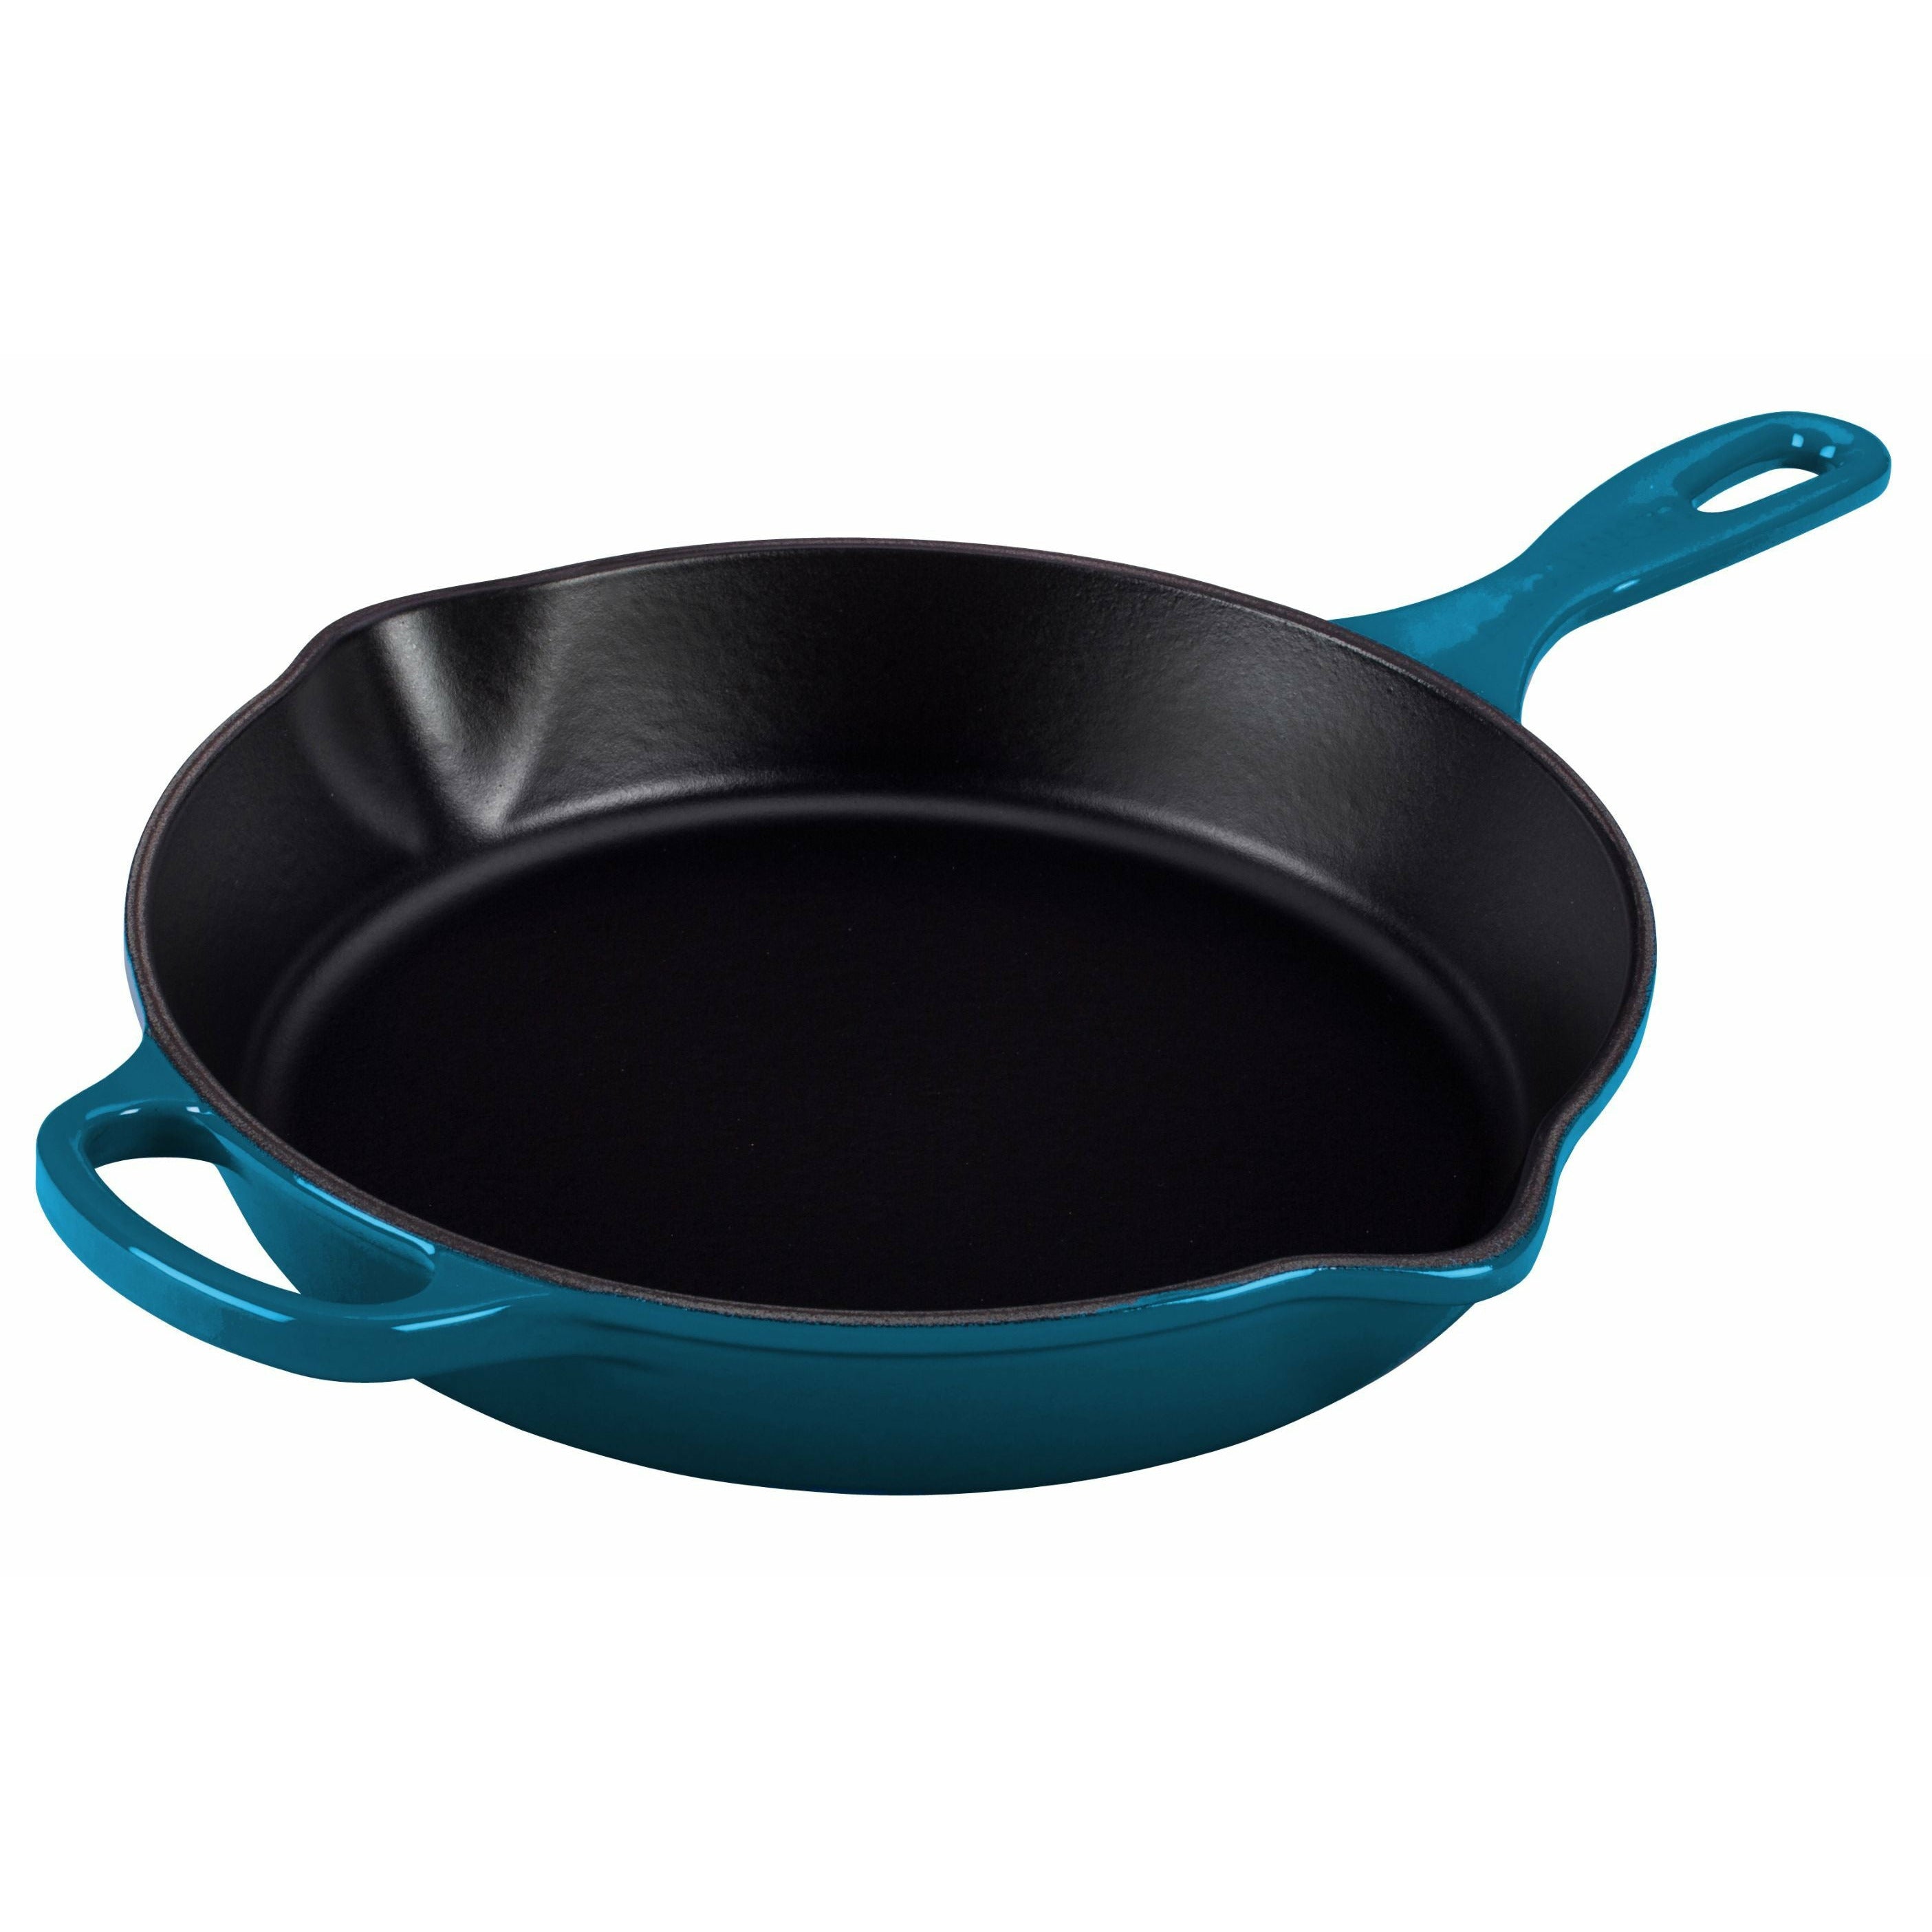 Le Creuset Nature High Frying And Serving Pan 26 Cm, Deep Teal